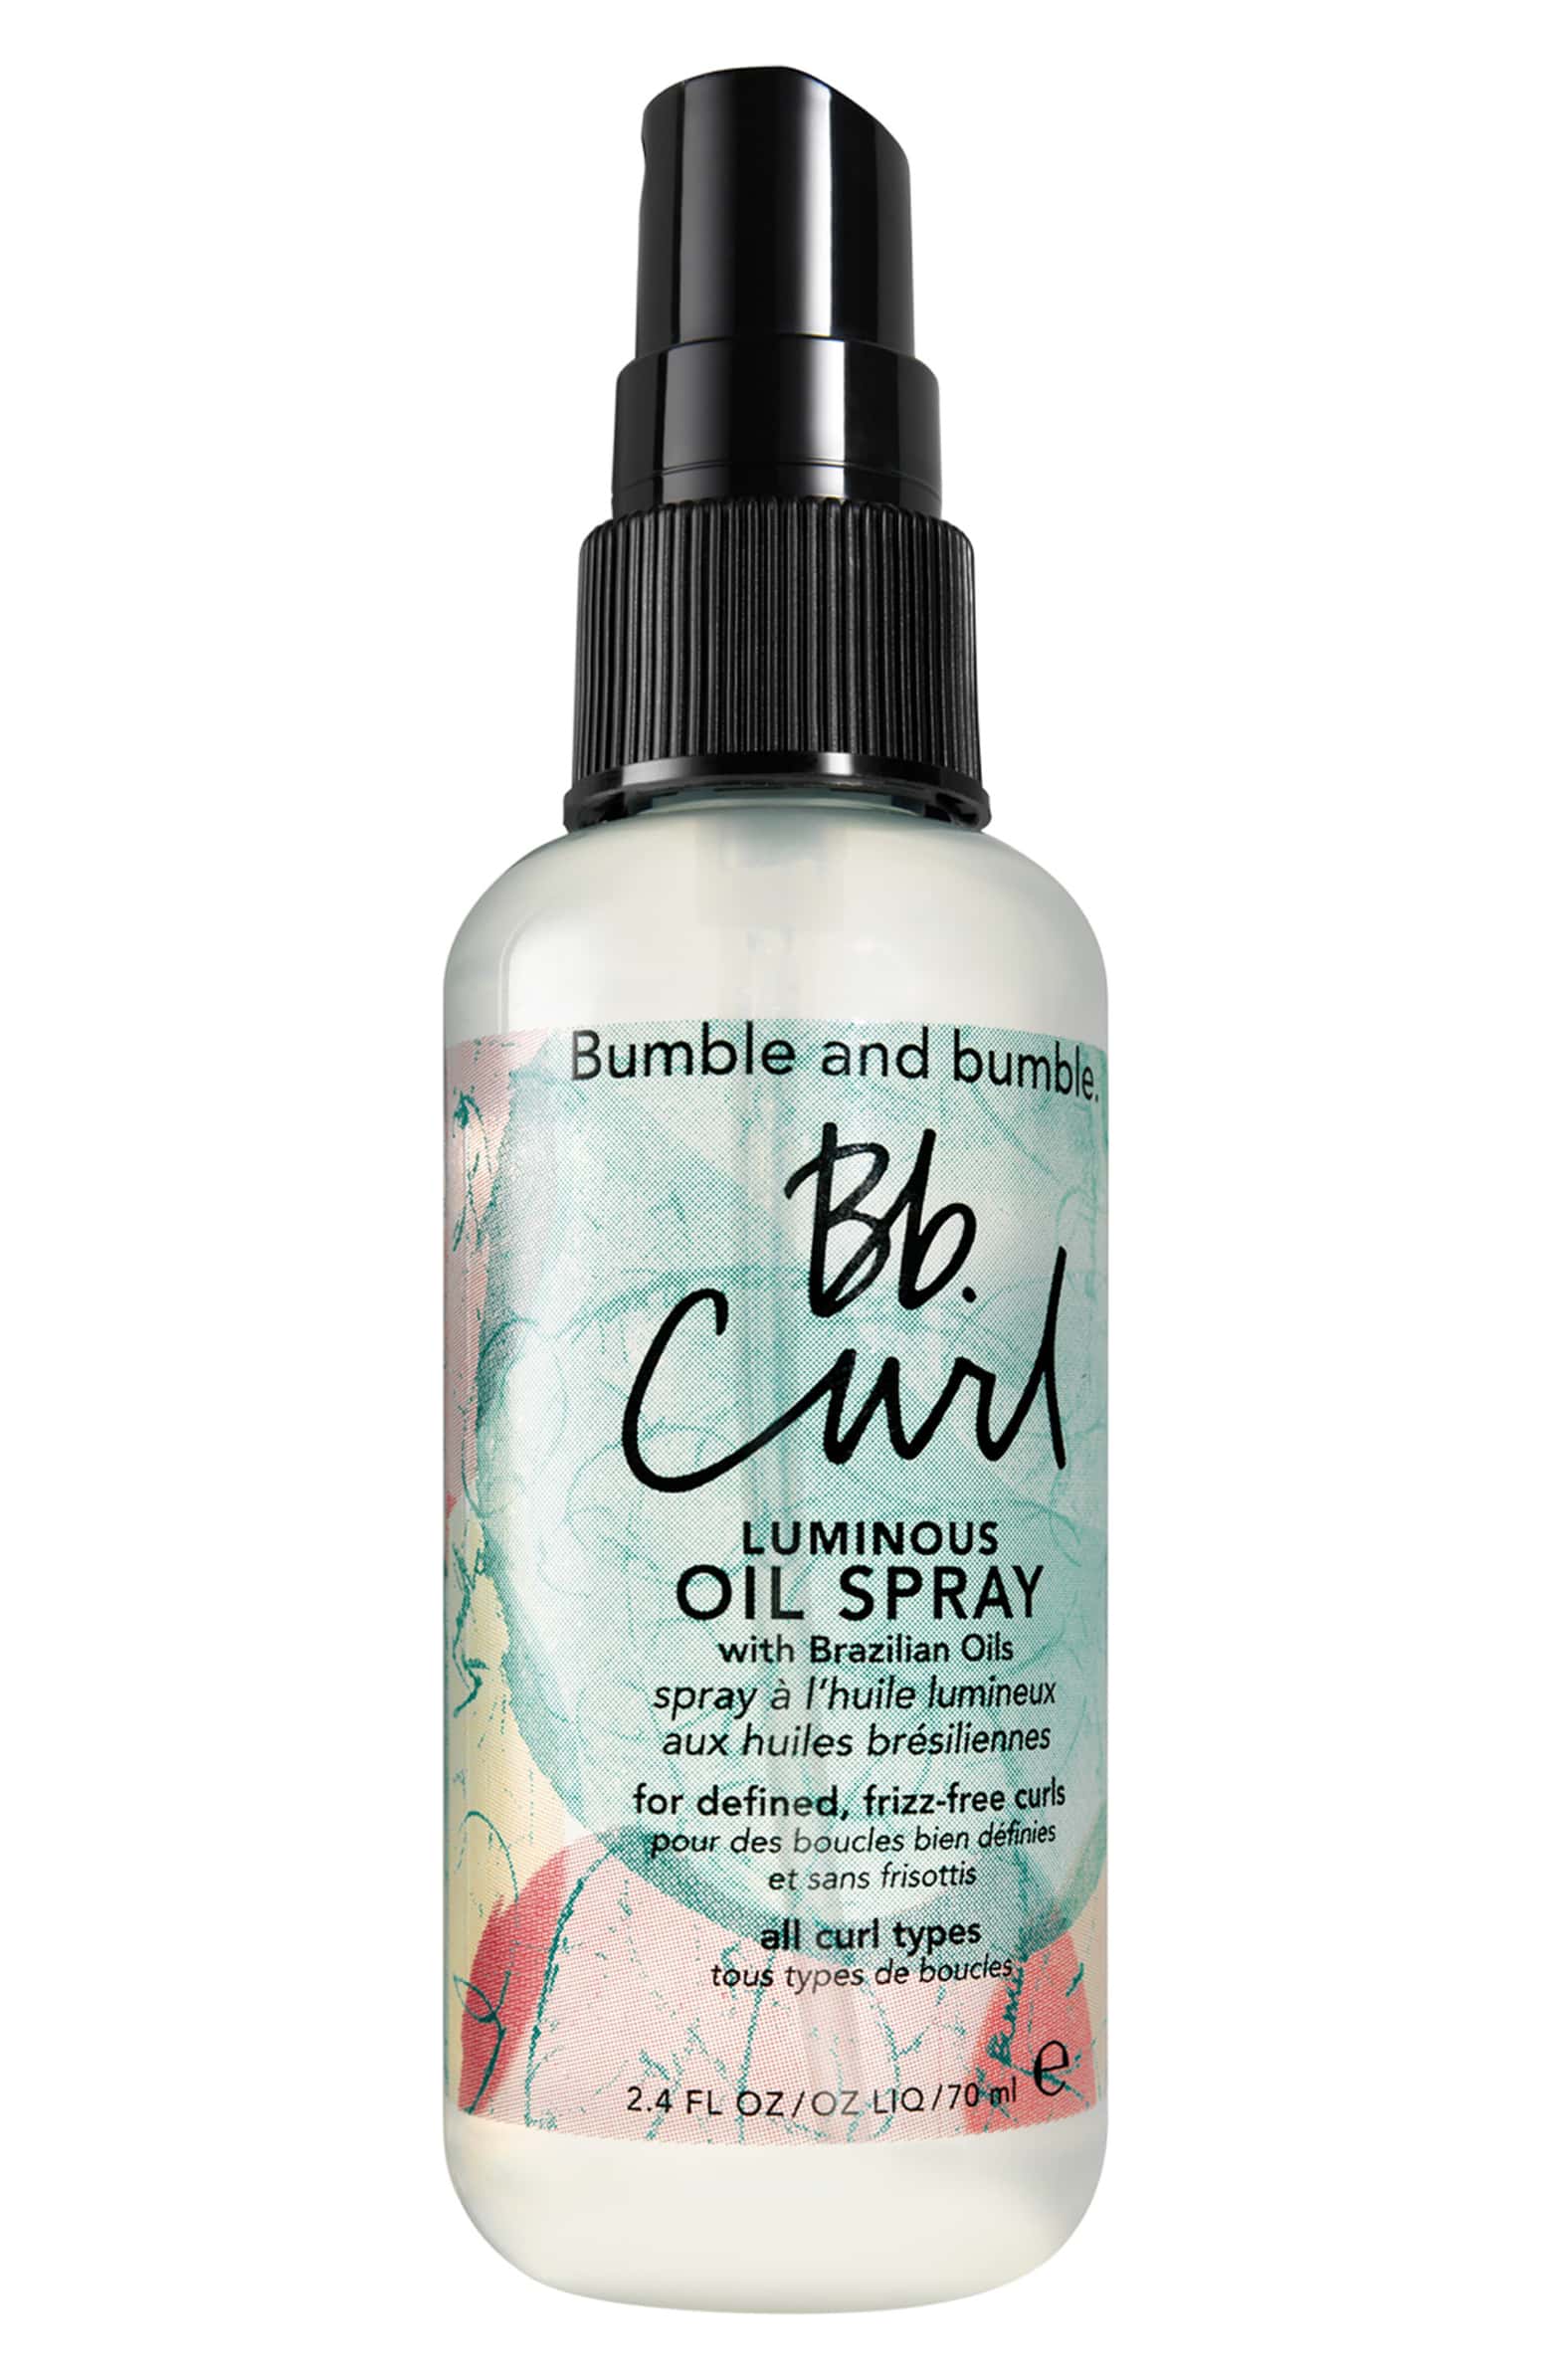 BUMBLE AND BUMBLE Bb. Curl Luminous Oil Spray 70ml | New London Pharmacy